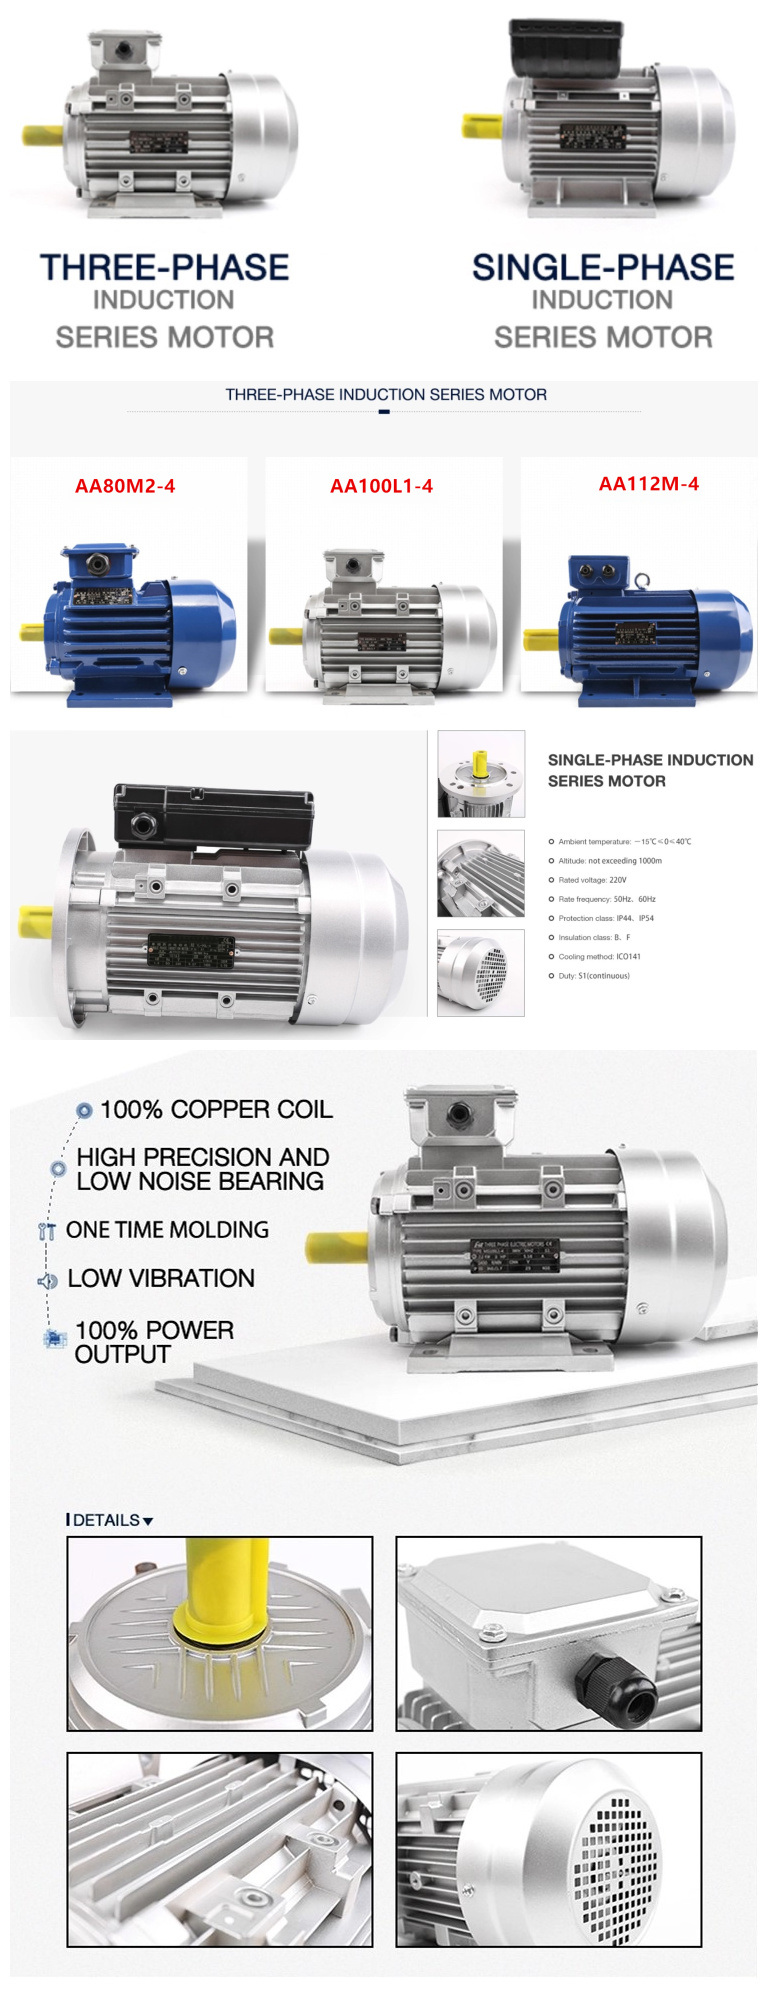 AC Electric Asynchronous Motor, Electric Engine, Synchronous Machine, 1 3 Phase Motors